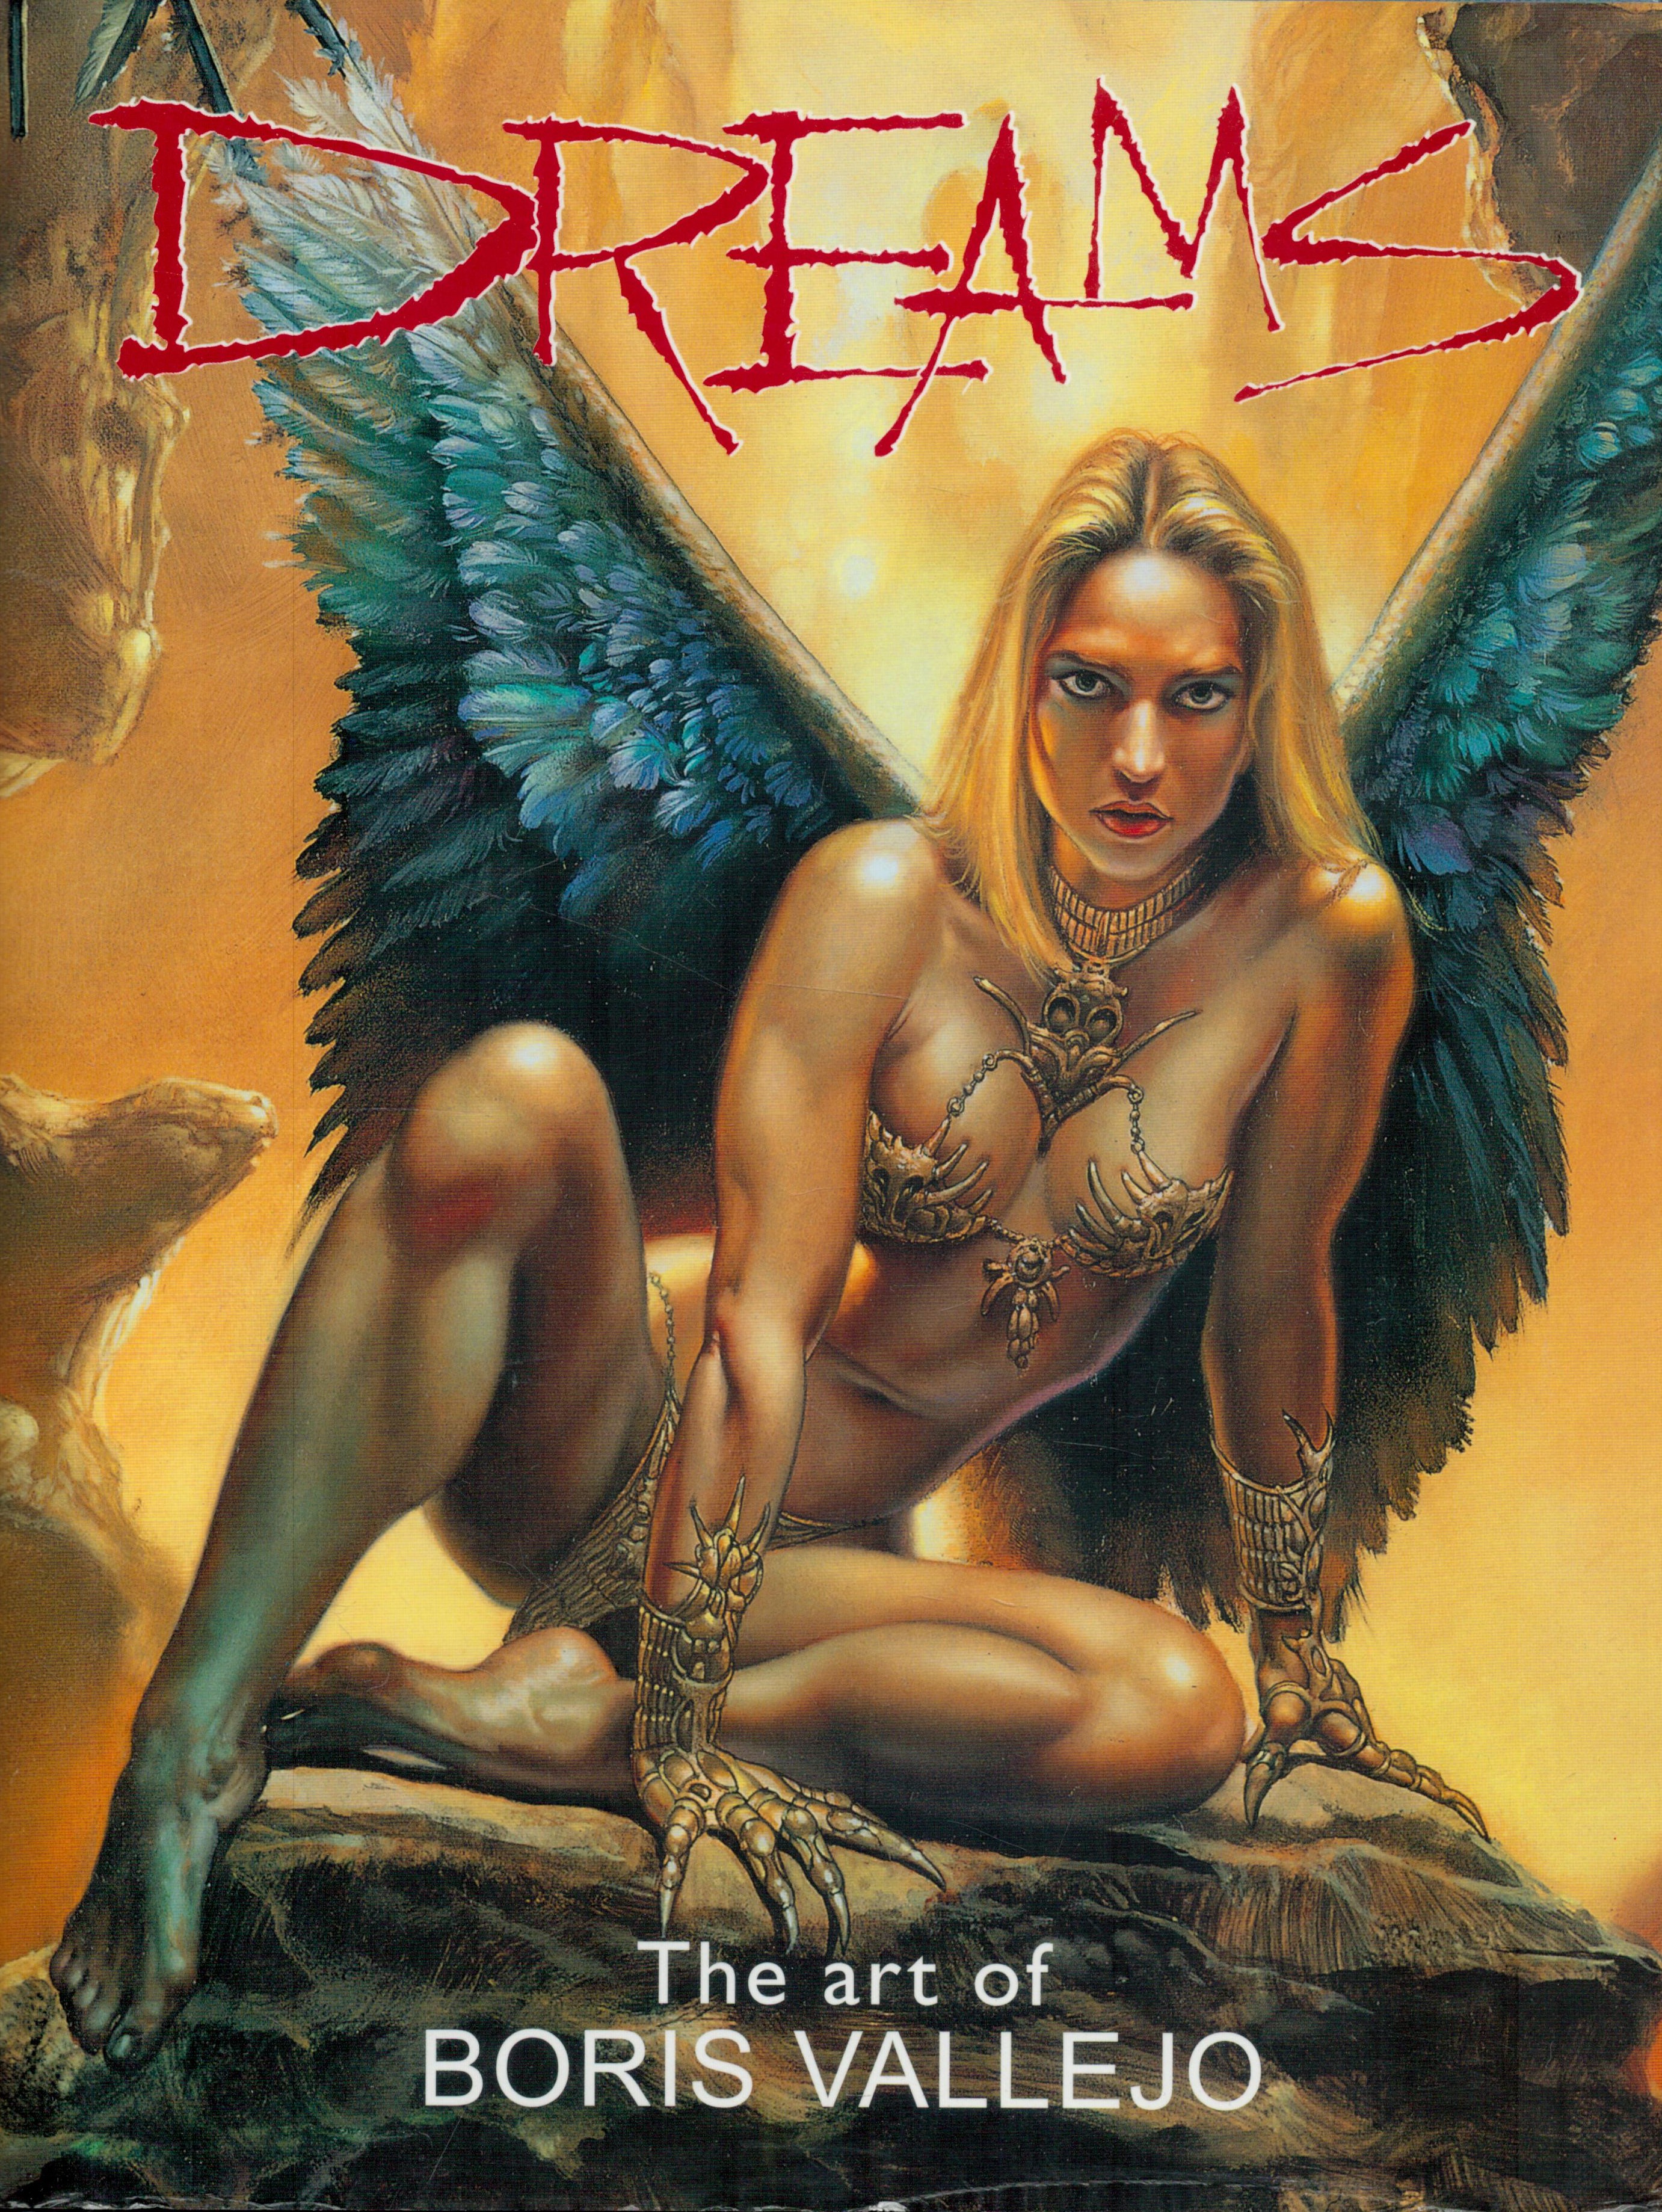 Dreams - The Art of Boris Vallejo 1999 First Edition Hardback Book with 128 pages published by Paper